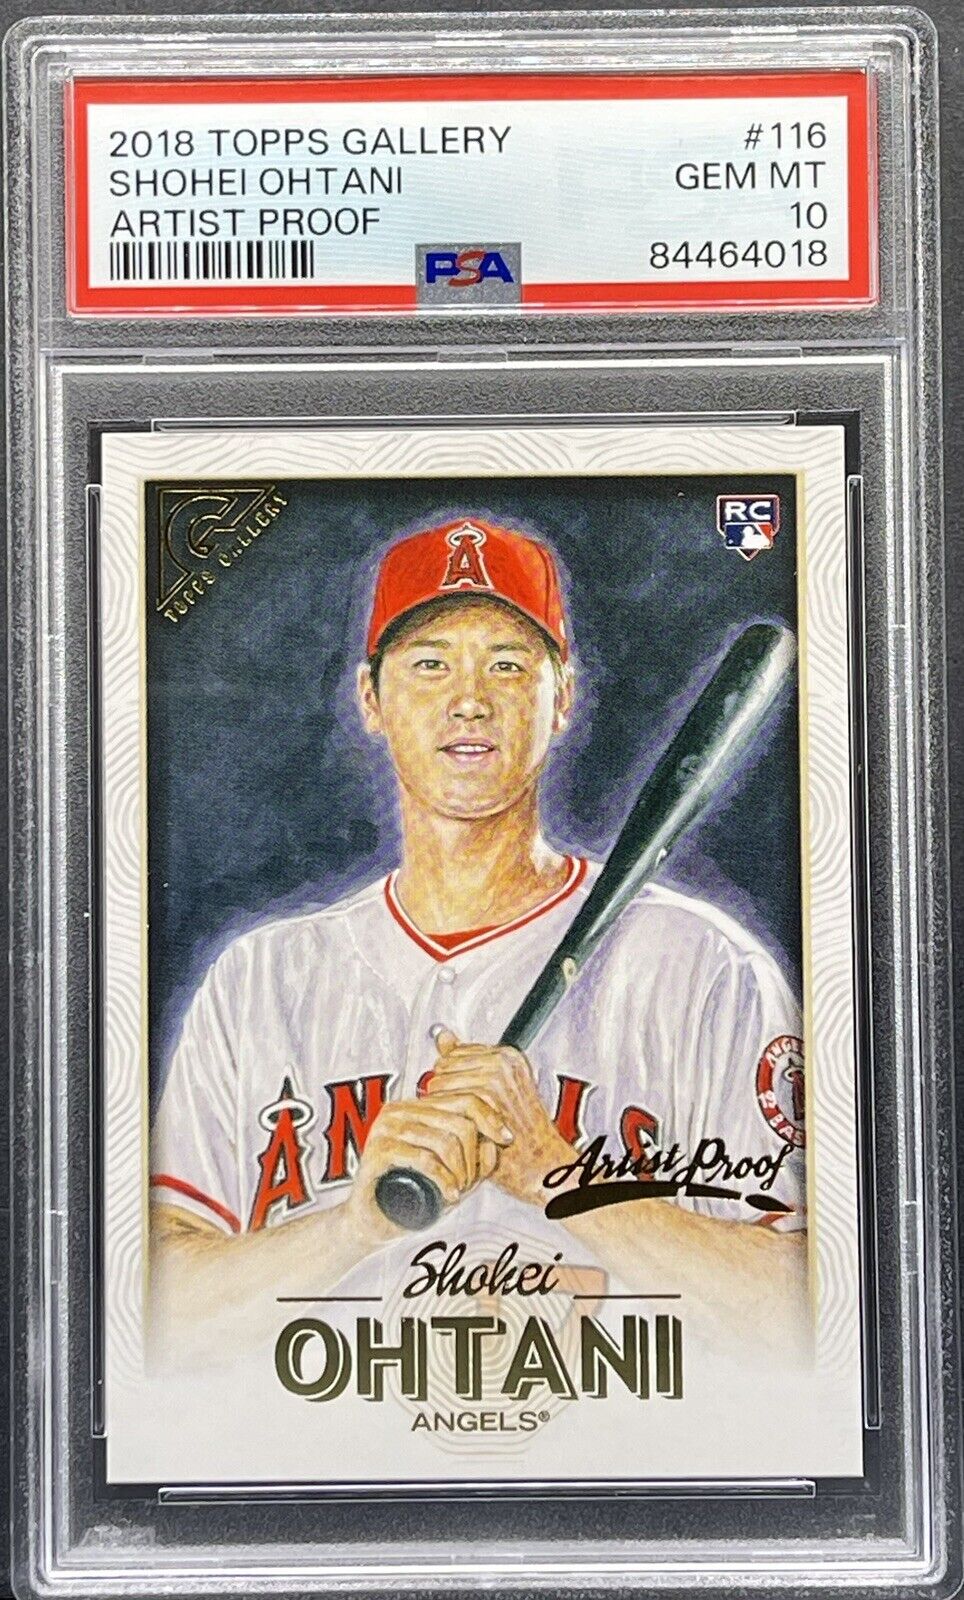 2018 Topps Gallery ARTIST PROOF Shohei Ohtani Rookie PSA 10 Angels Dodgers RC SP